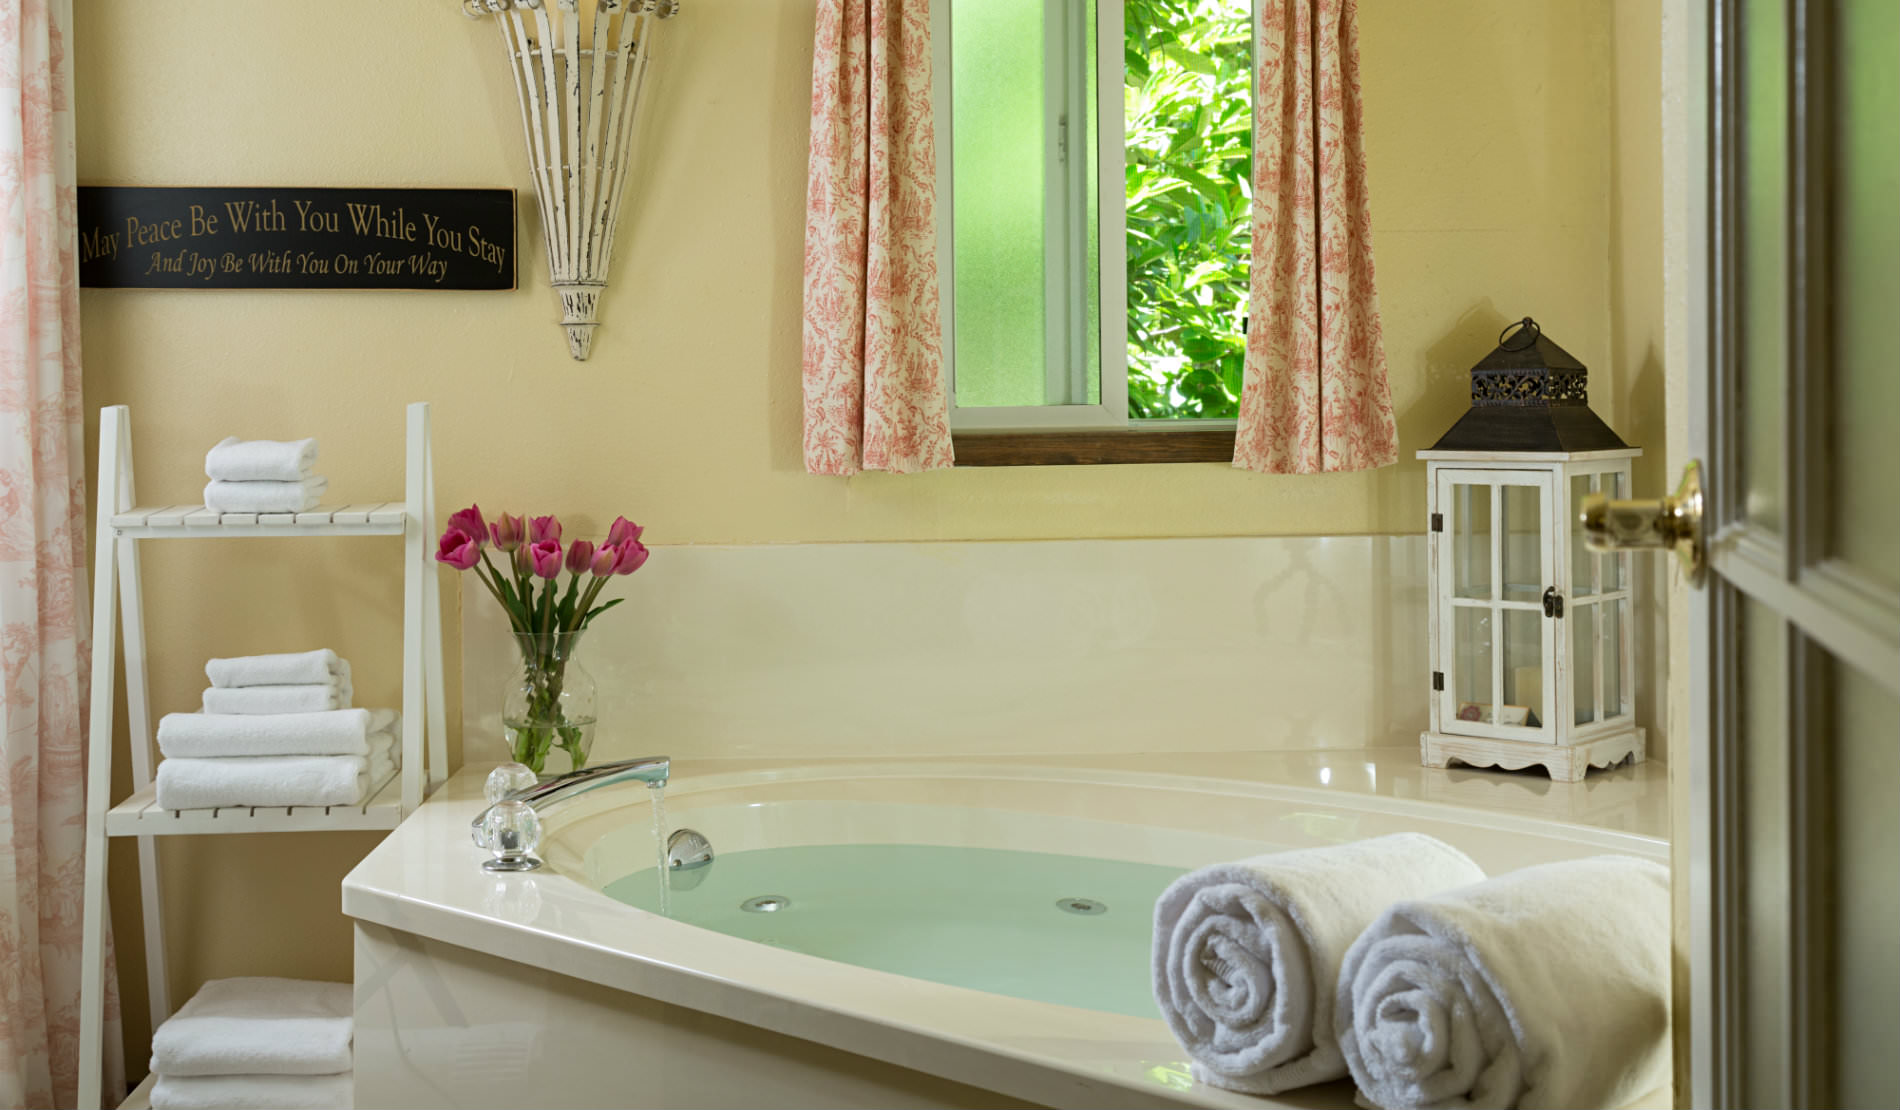 Whirlpool bath with white towels, pink flowers and window open to green tree.